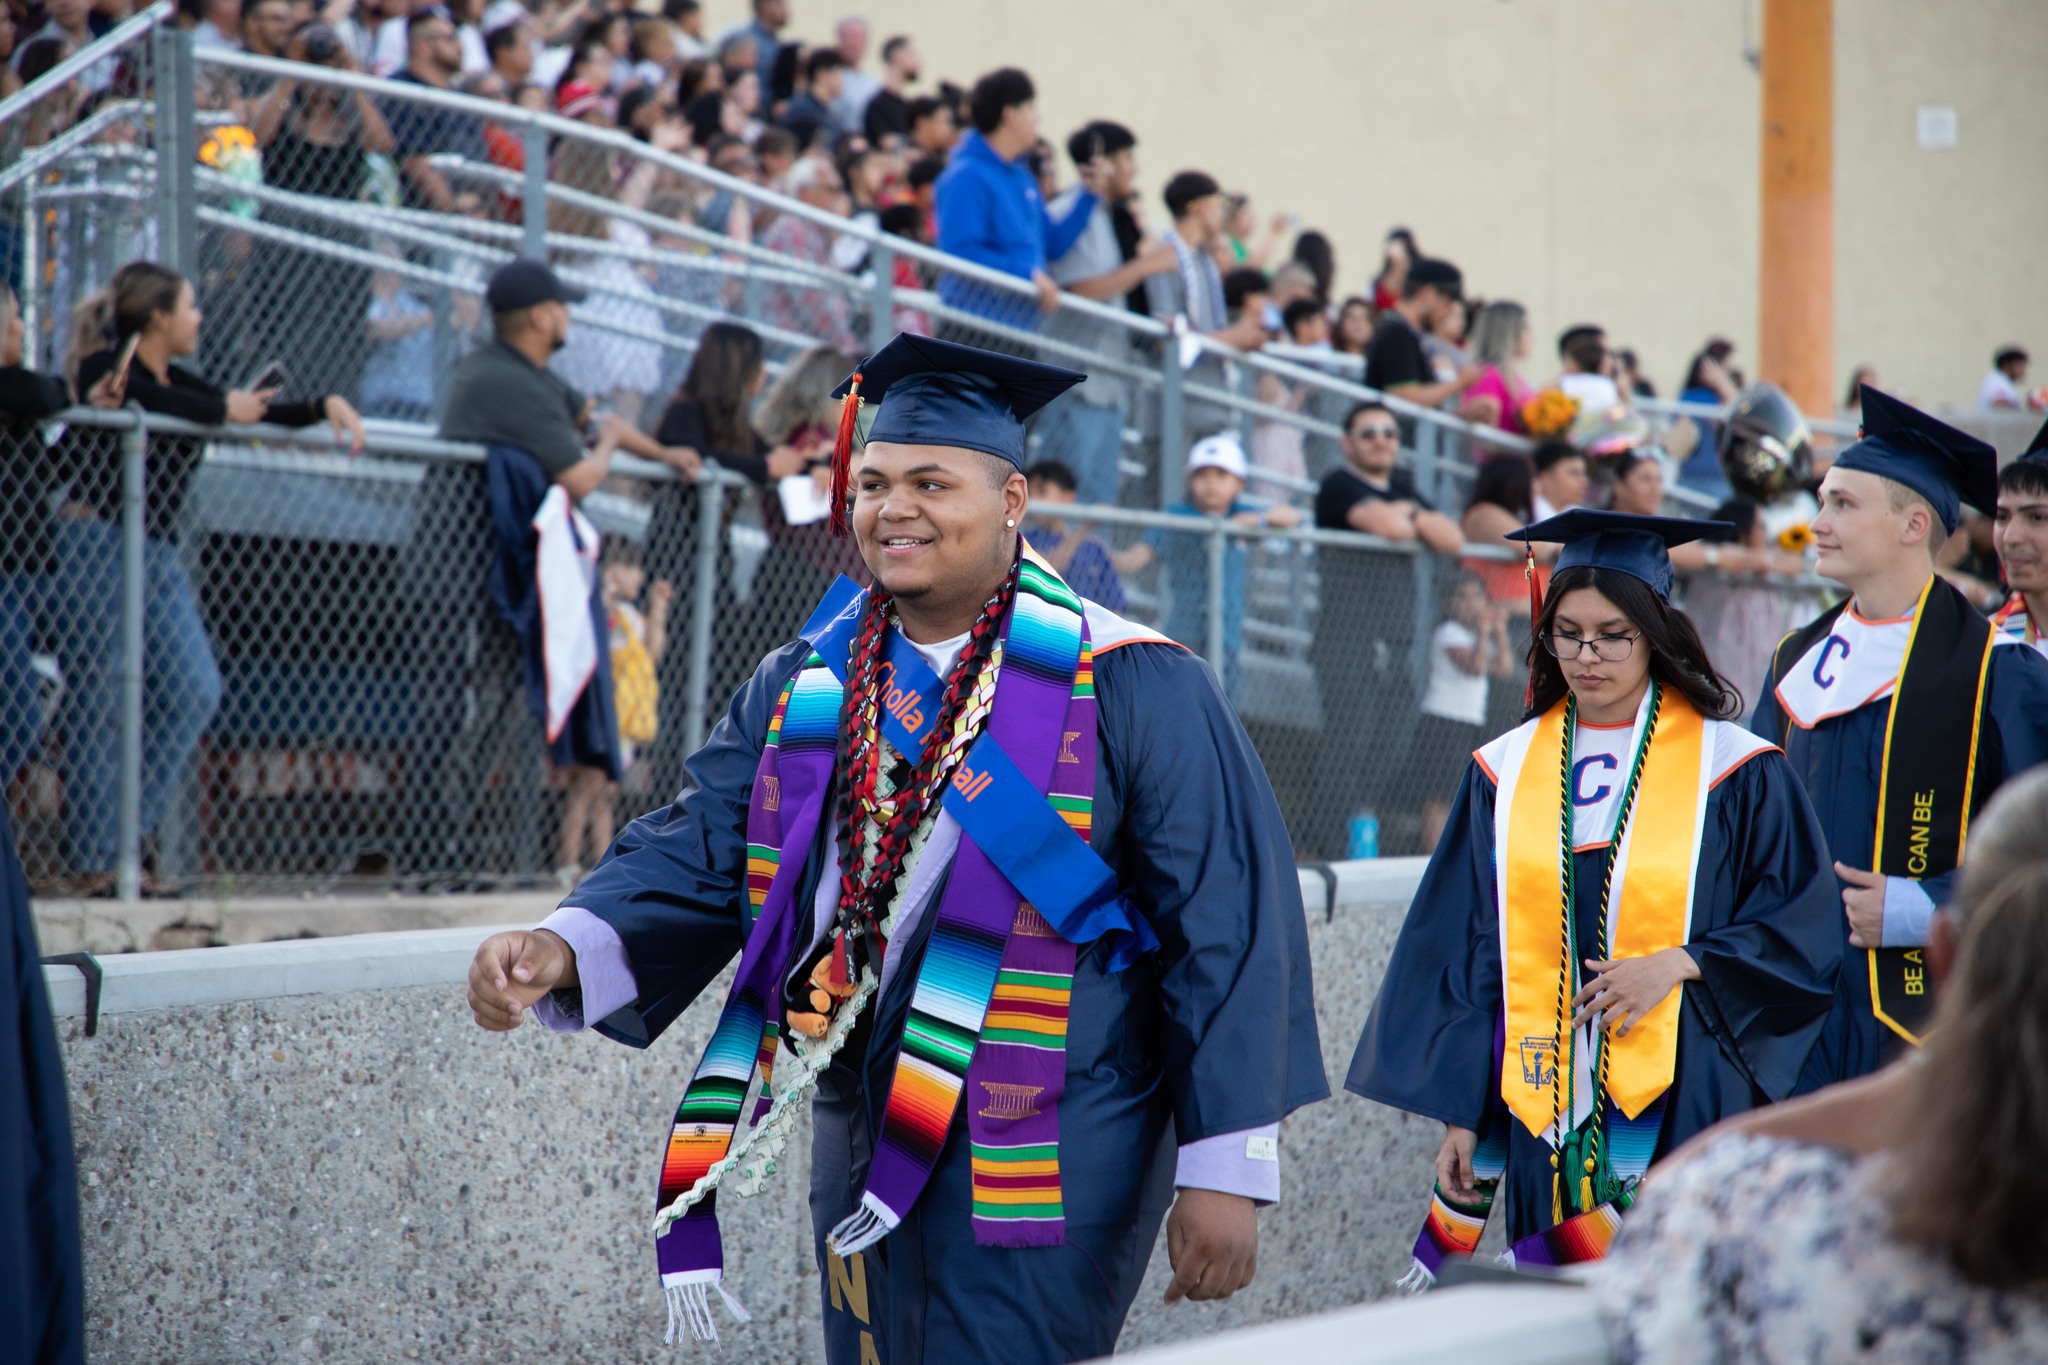 A Cholla grad smiles in his cap and gown as he makes his way onto the football field